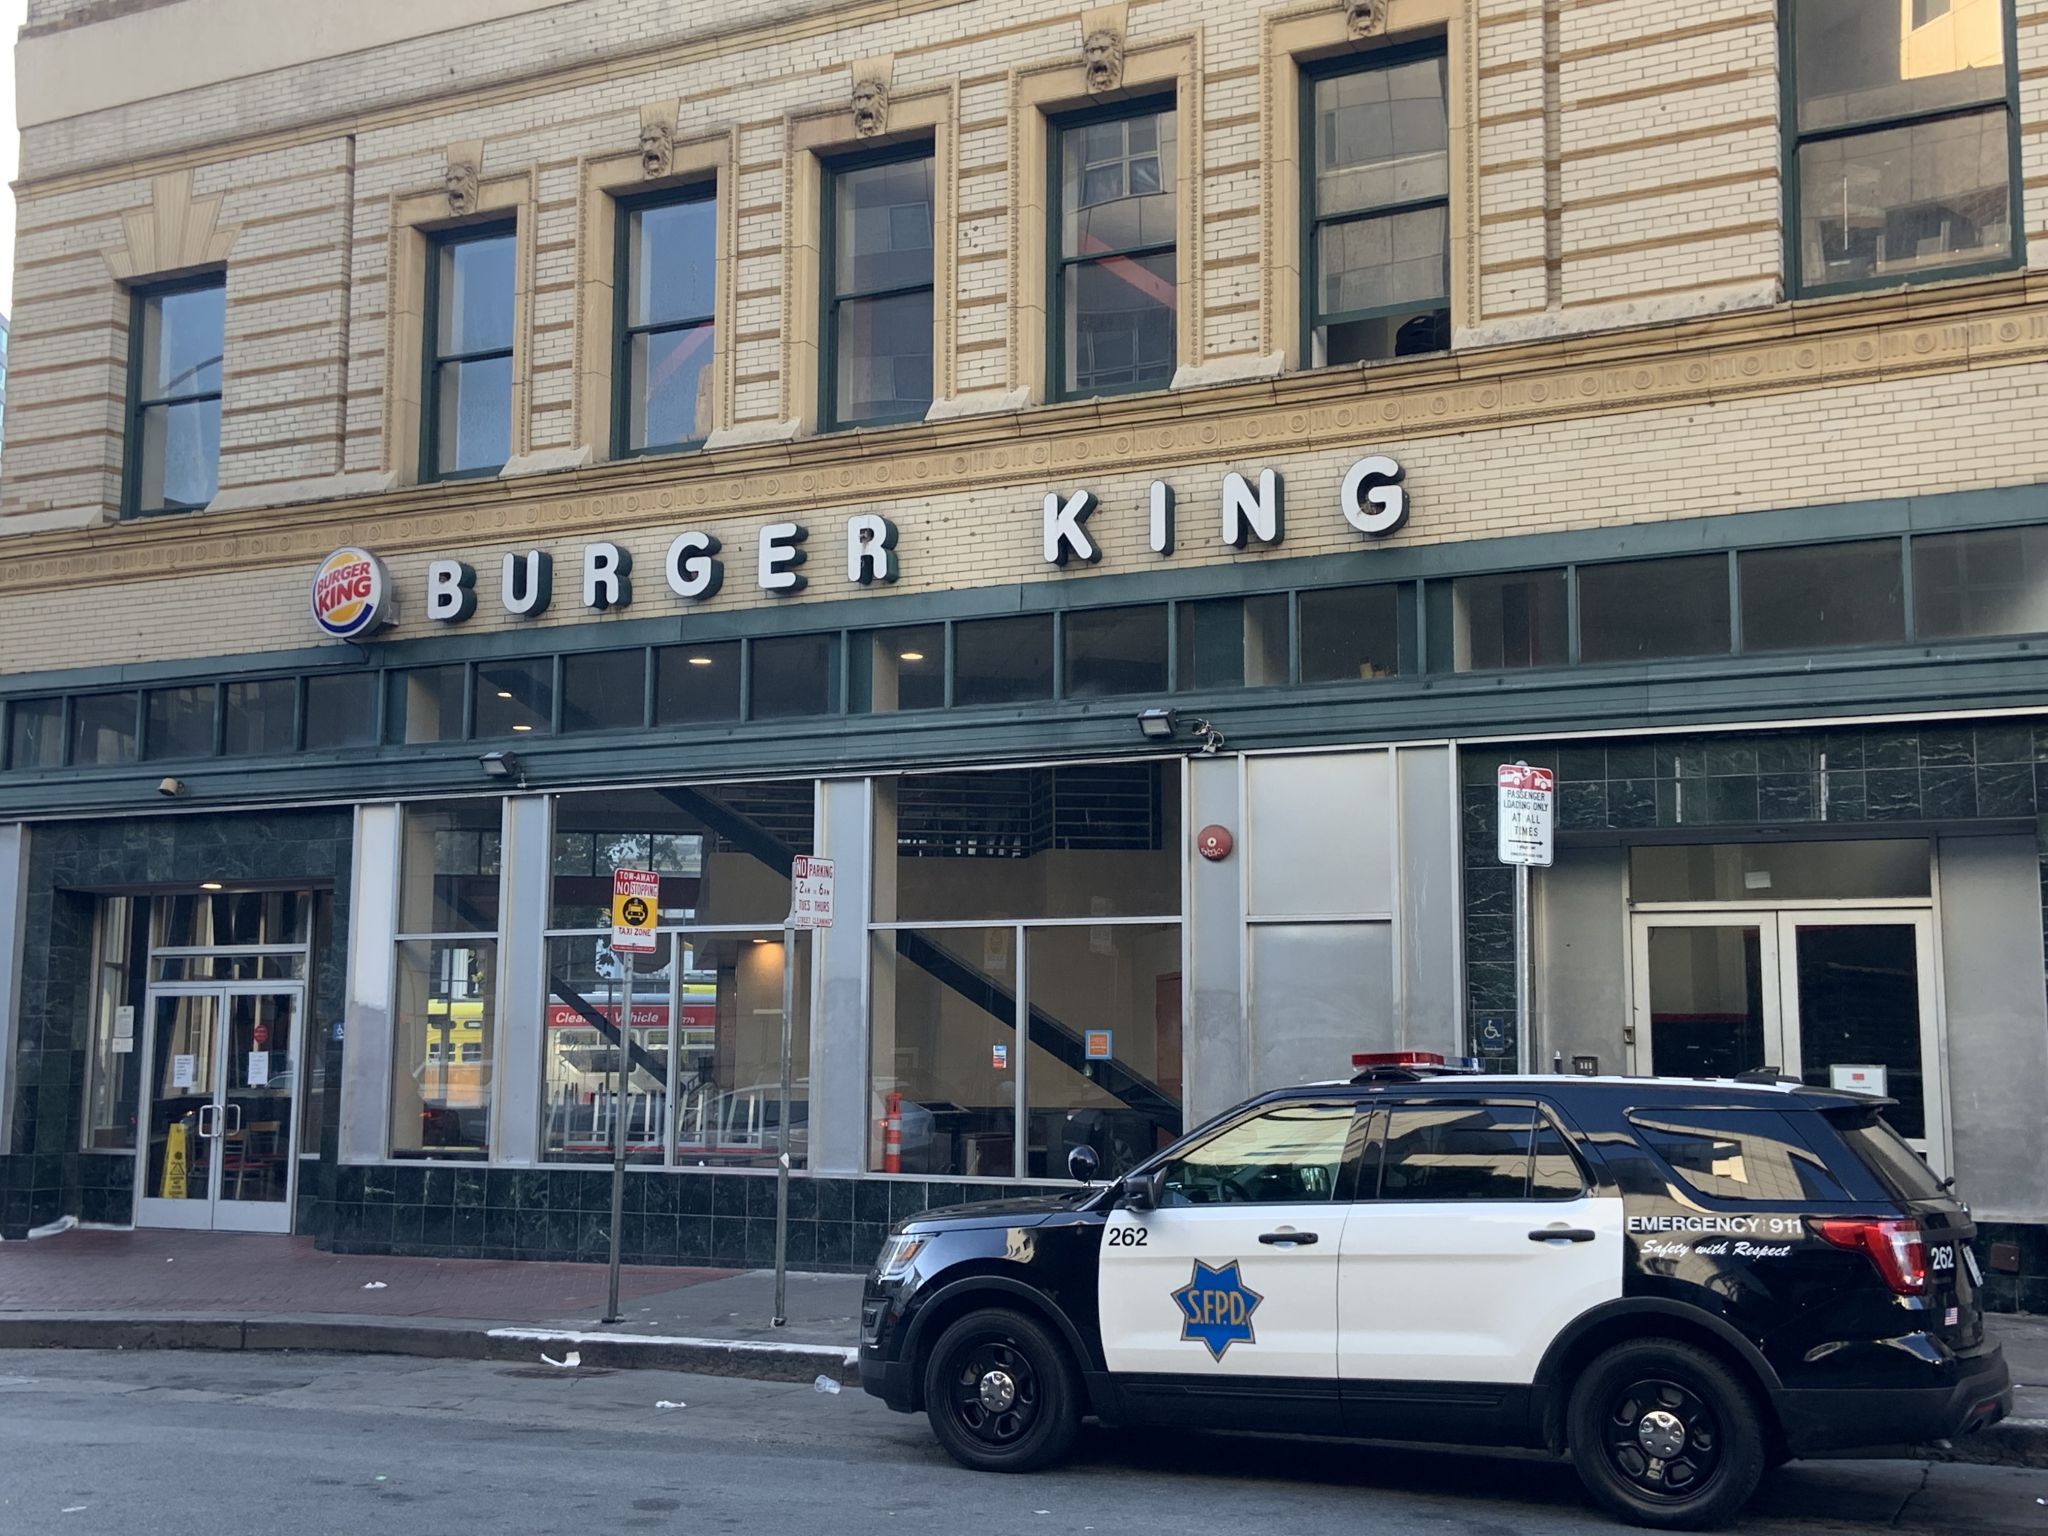 The state of California fined 2 owners of the SF Burger King